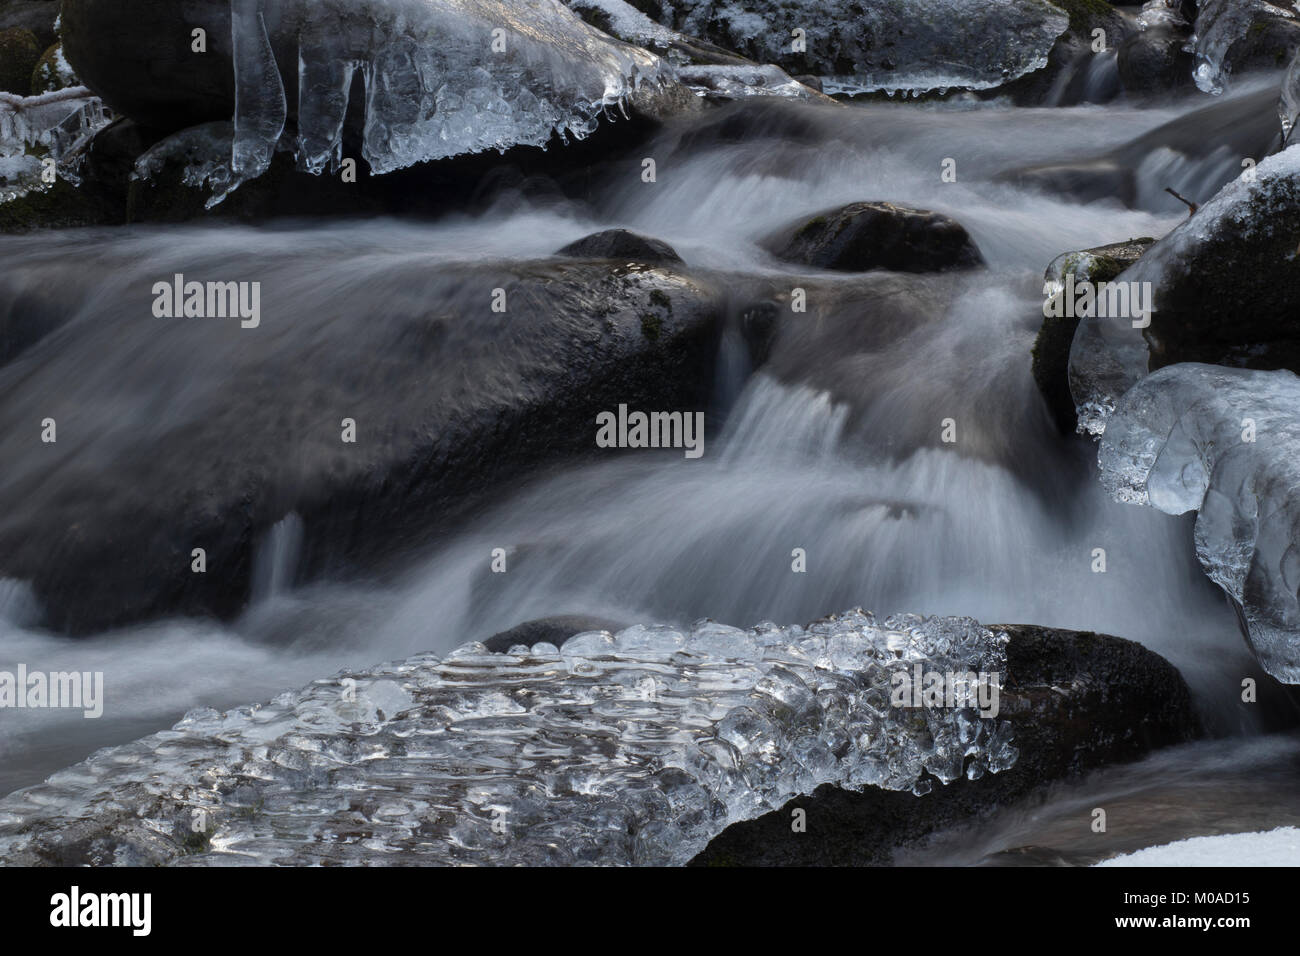 Cold winter day. Waterfall with blurred water flow, rocks in a creek or stream. Stock Photo